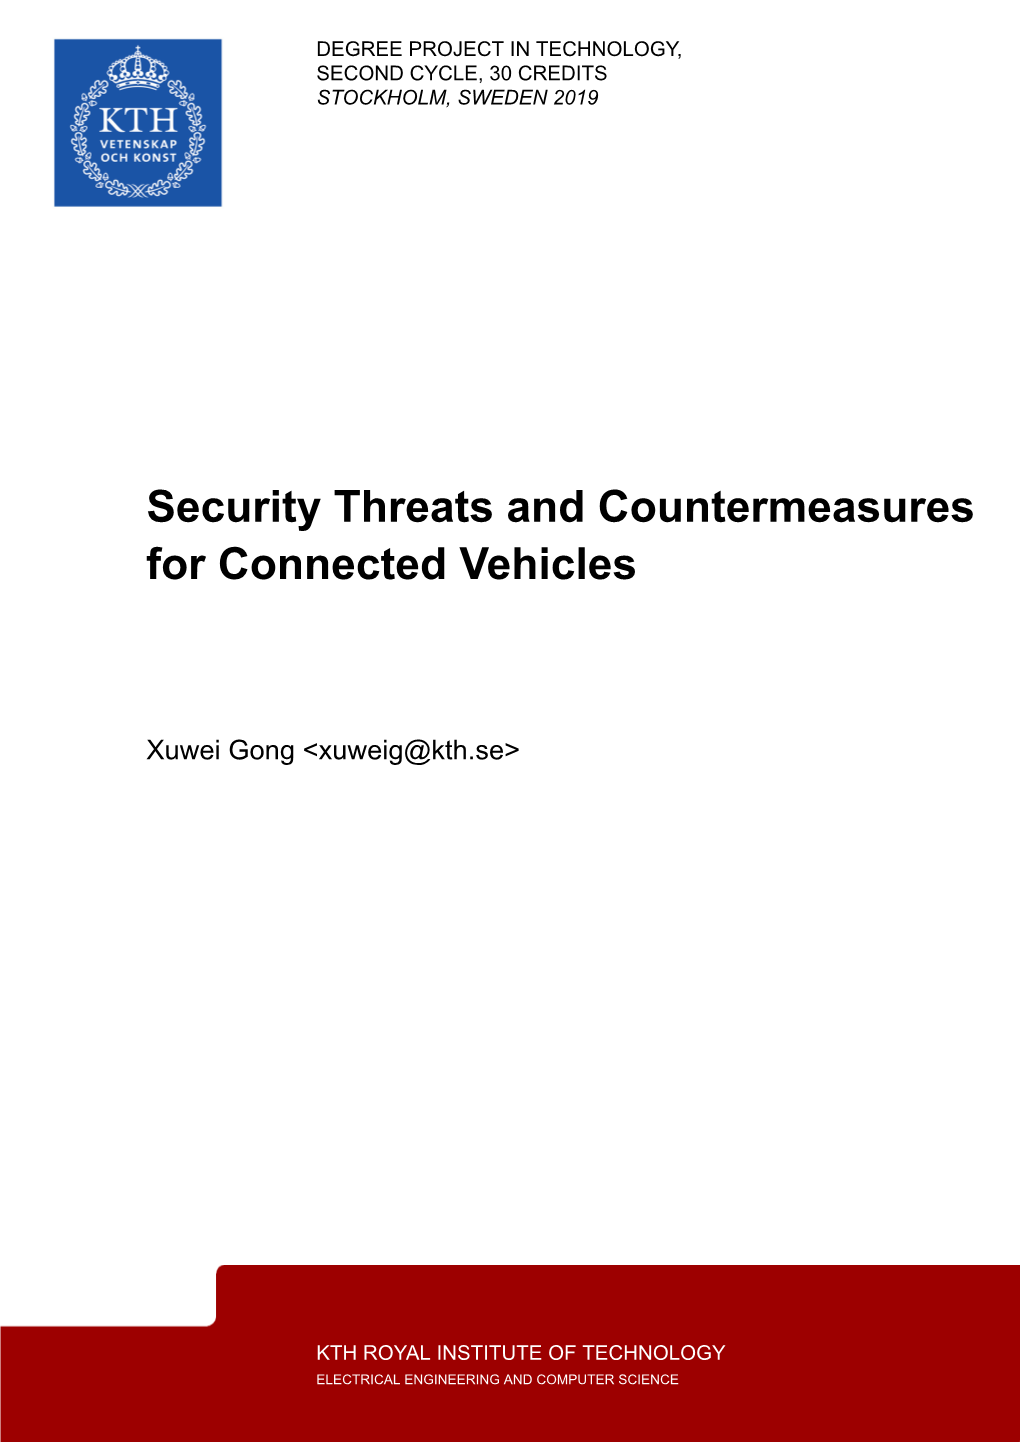 Security Threats and Countermeasures for Connected Vehicles